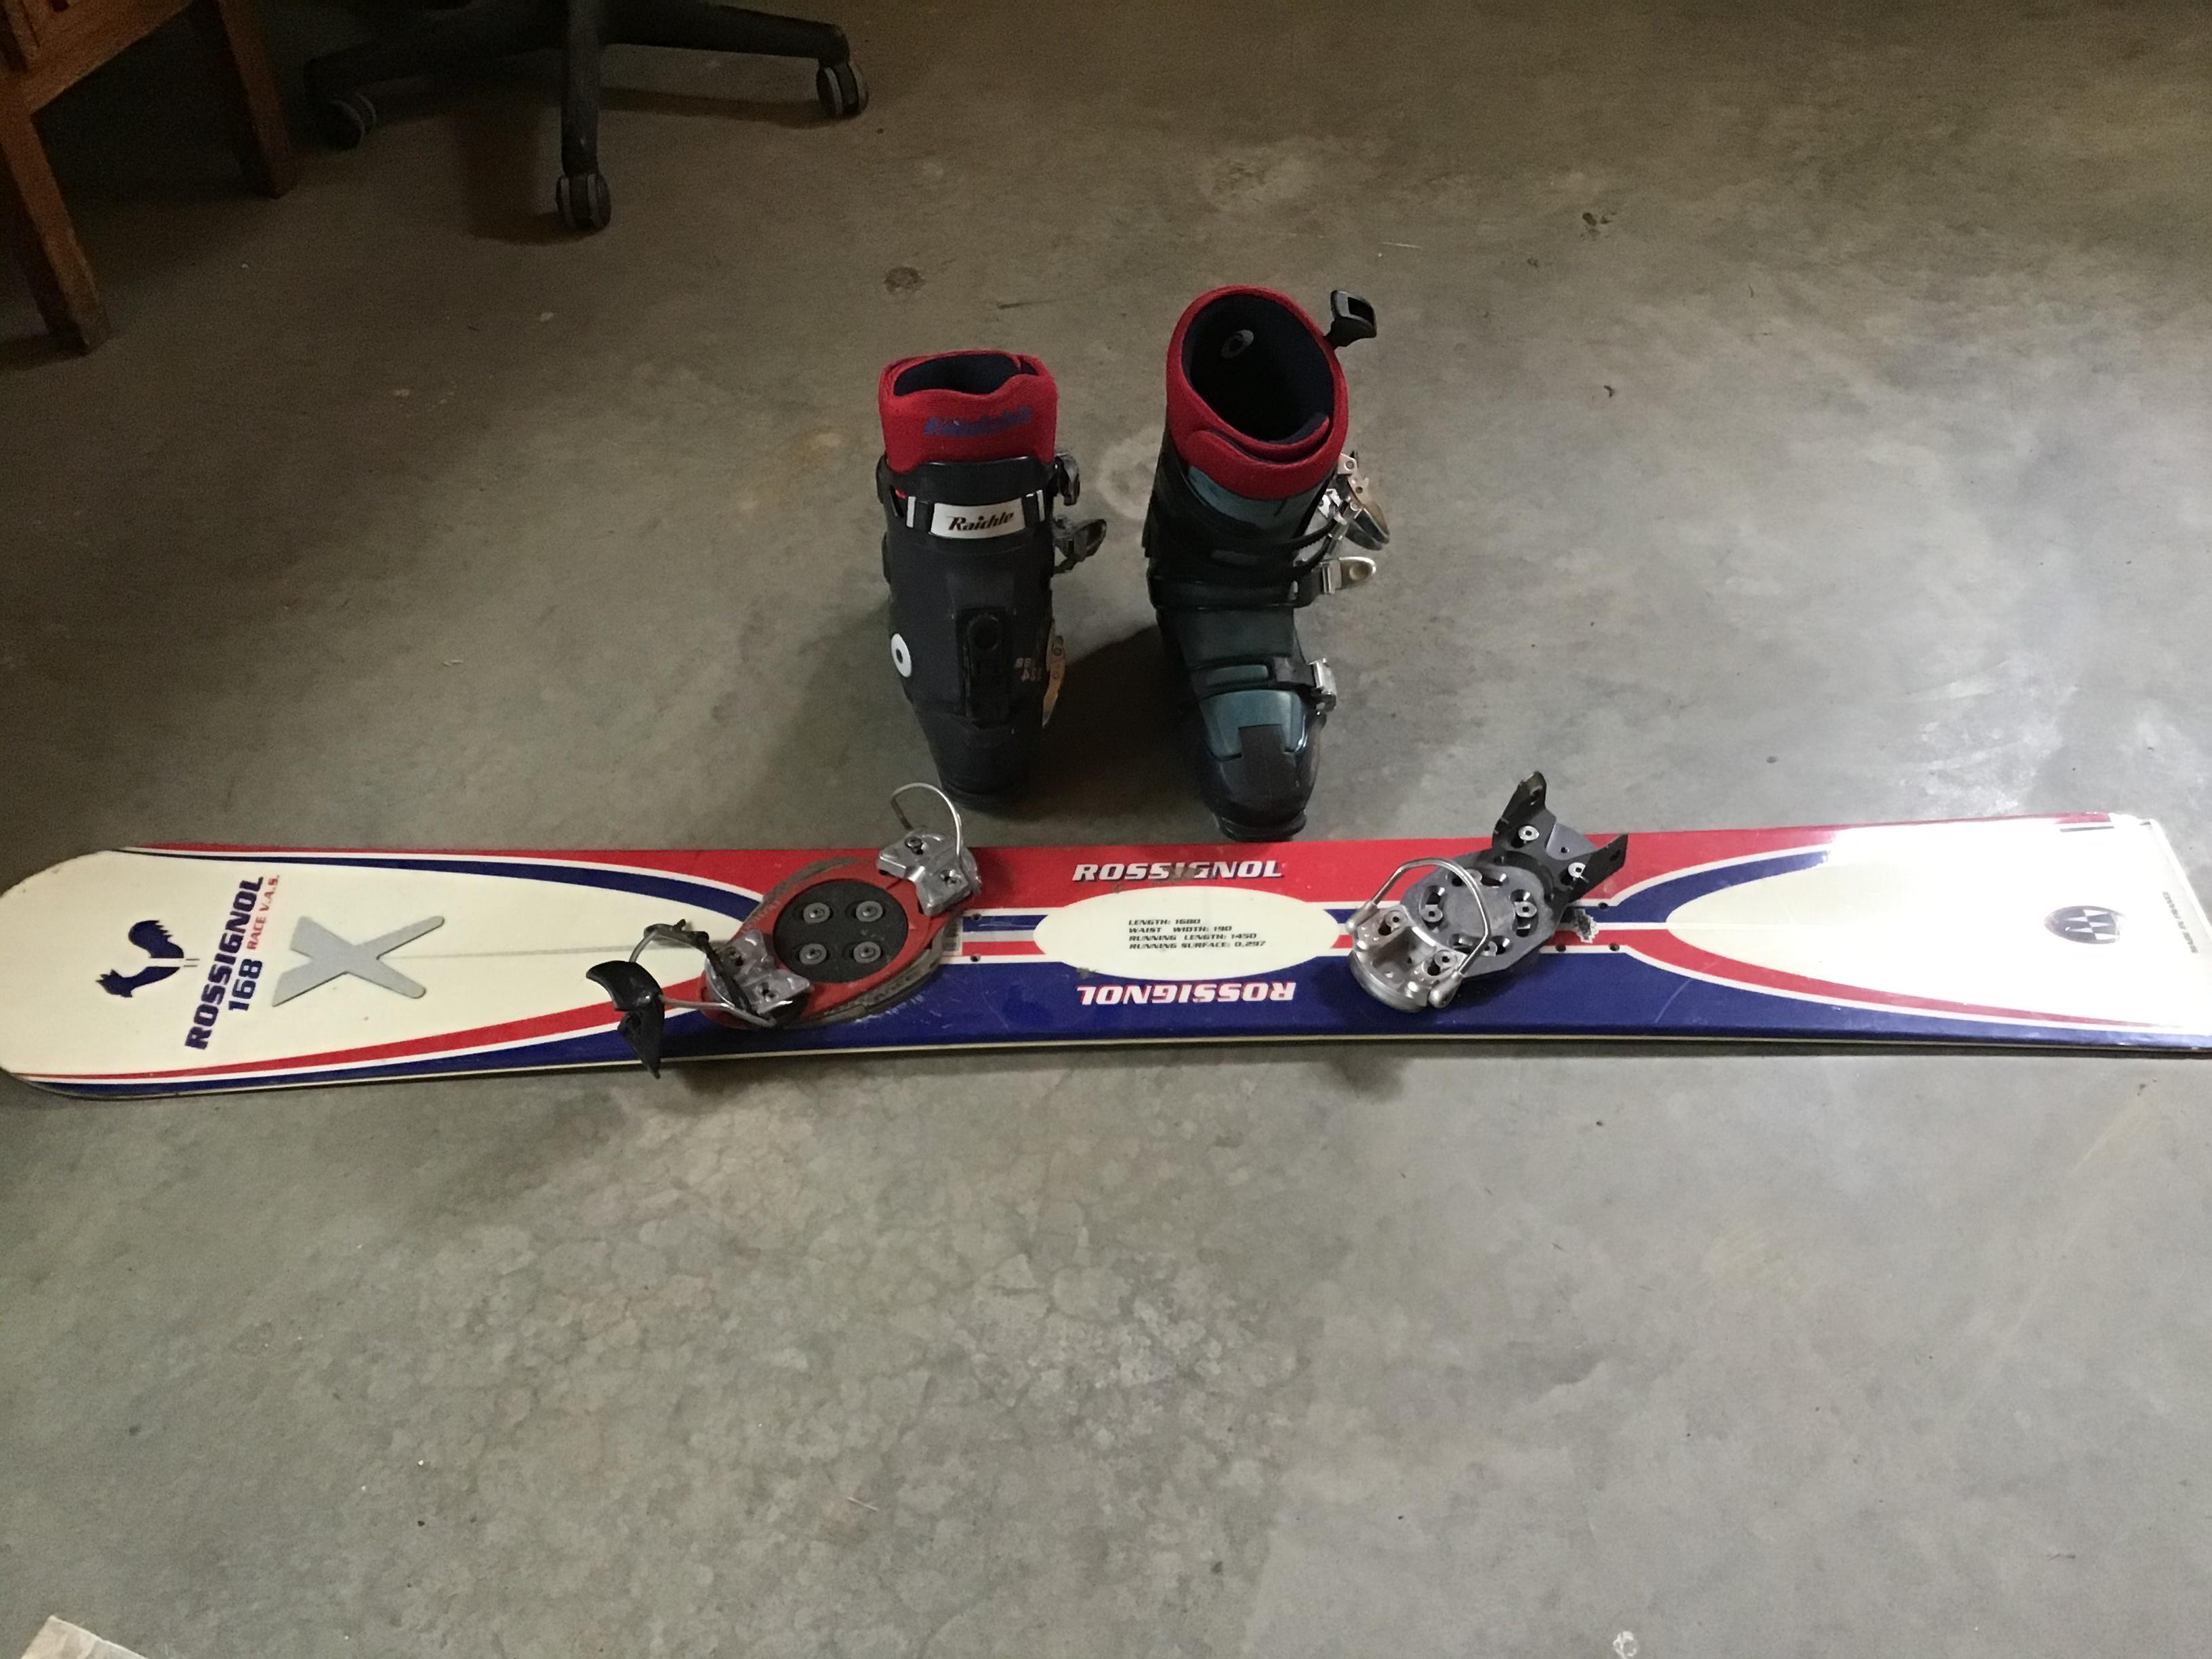 Board and boots